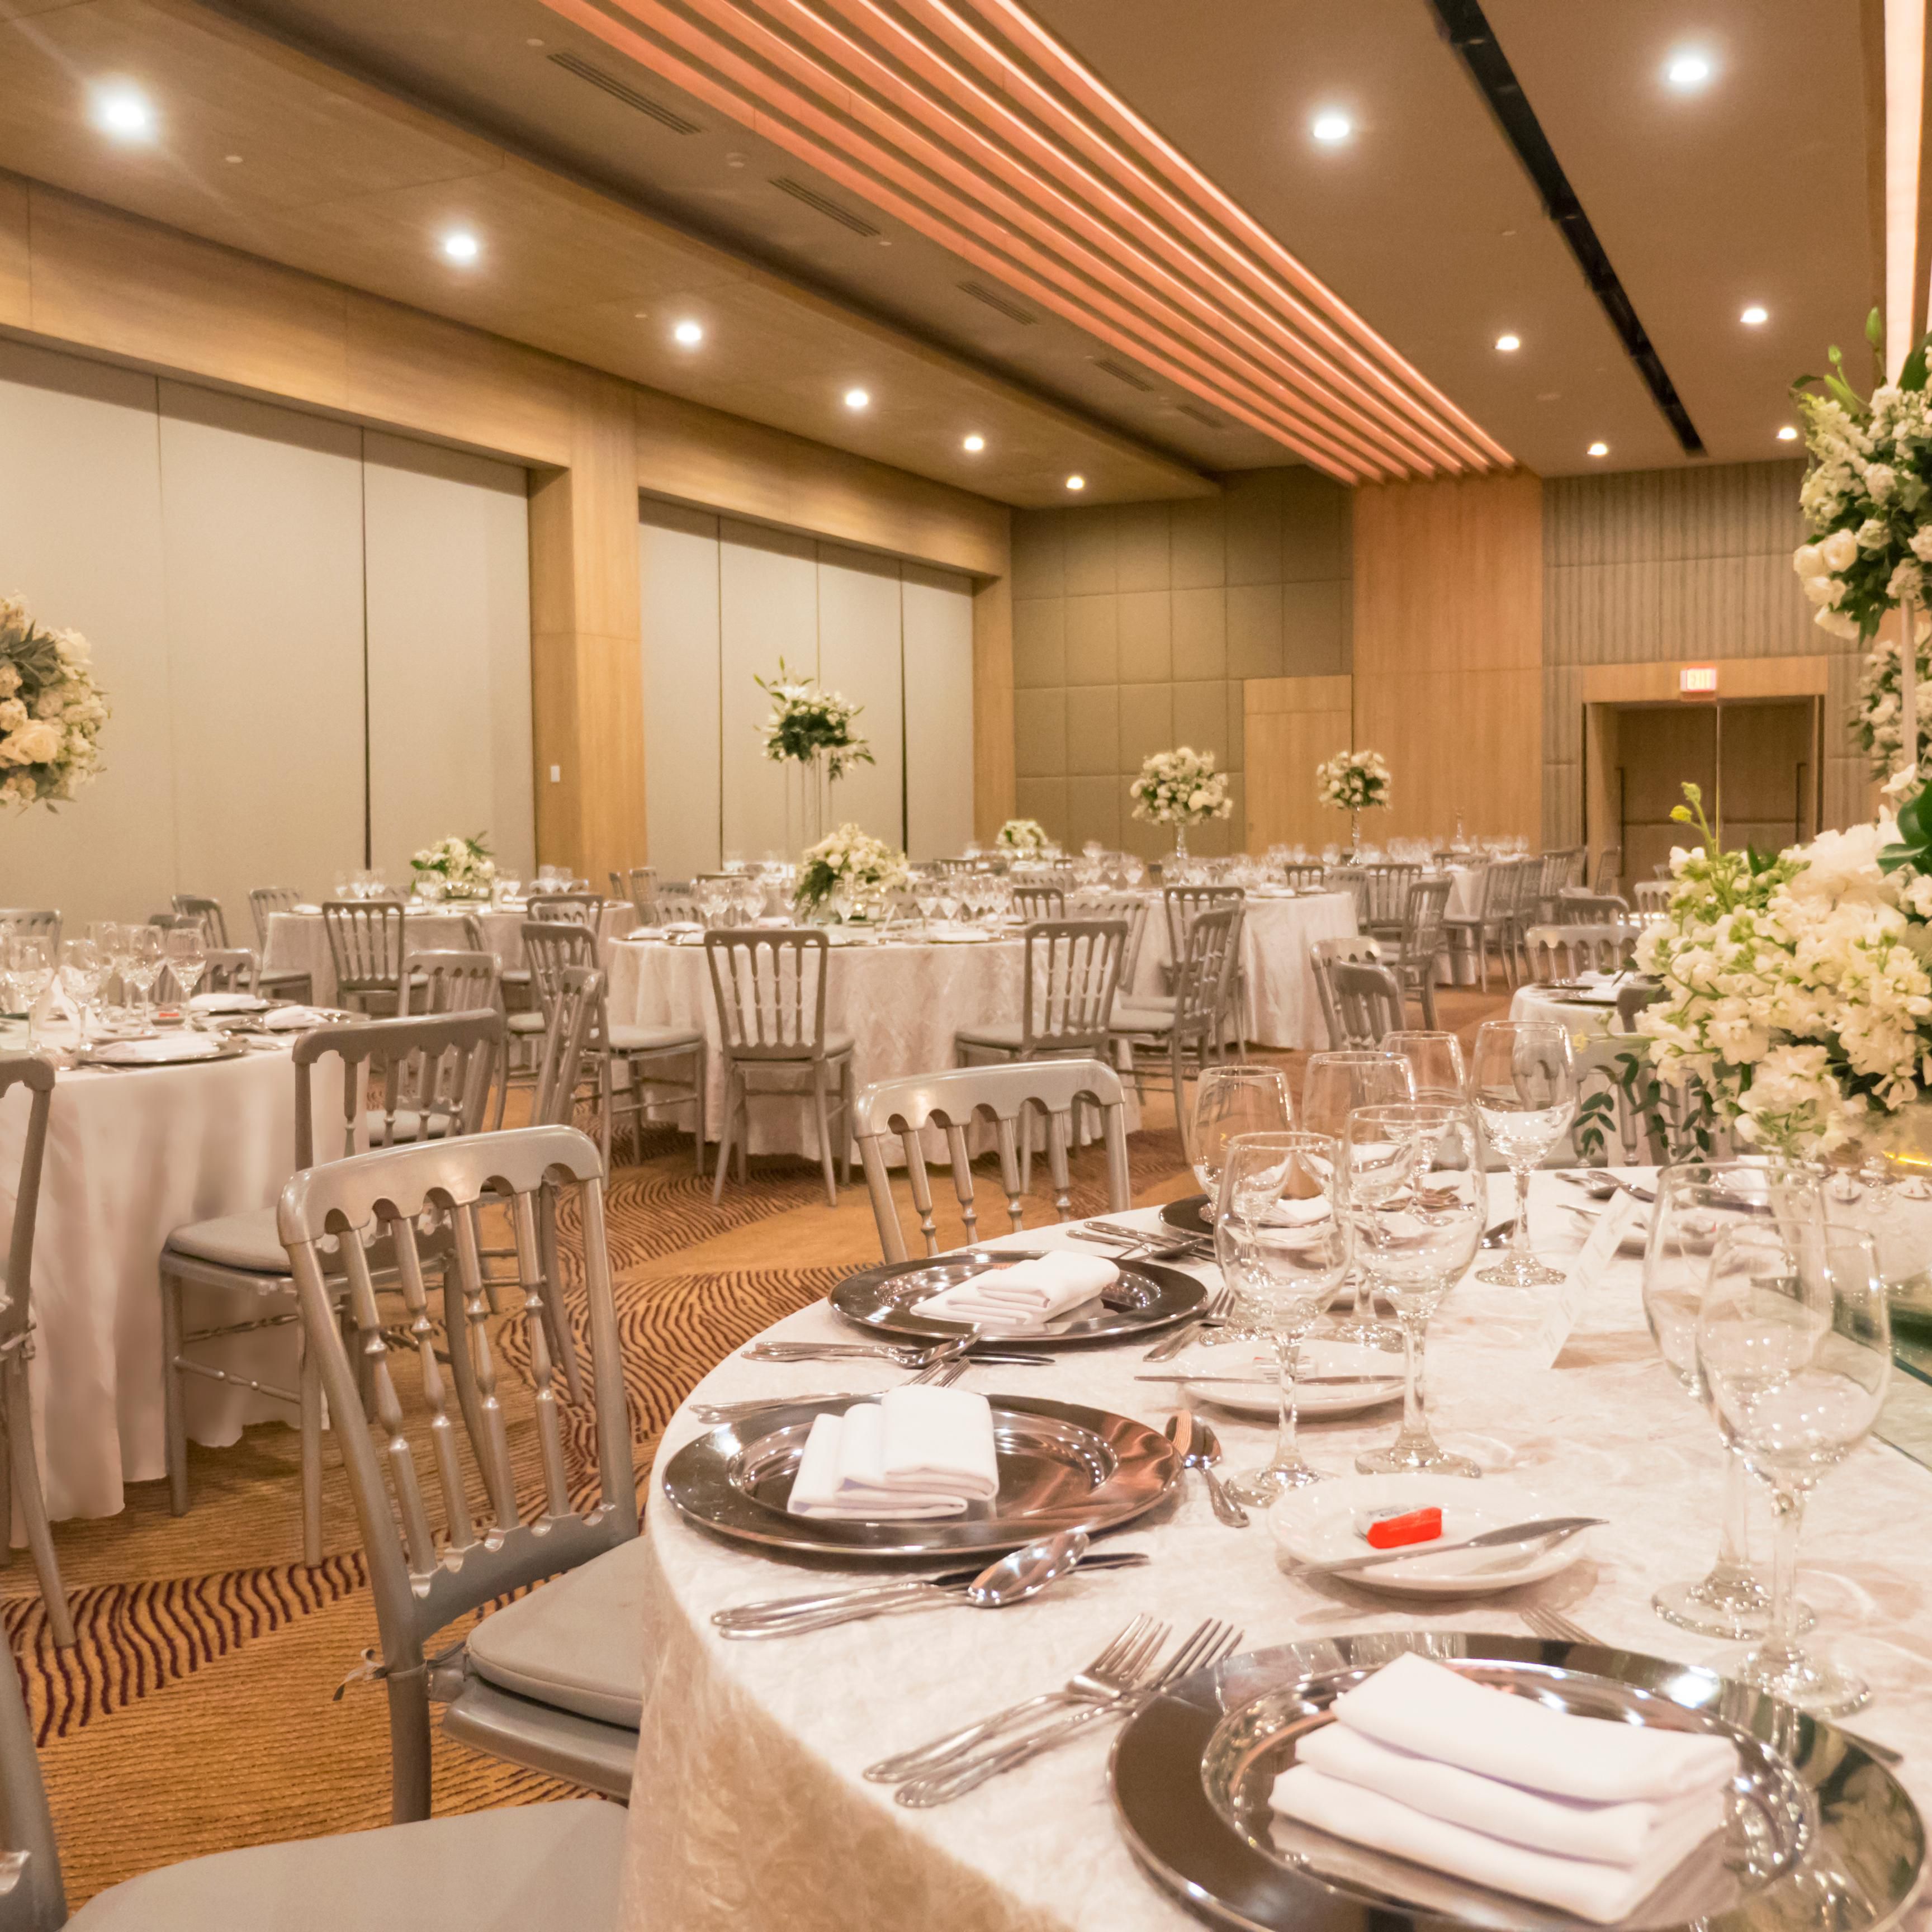 Crowne Plaza Monterrey is the perfect venue for any event.